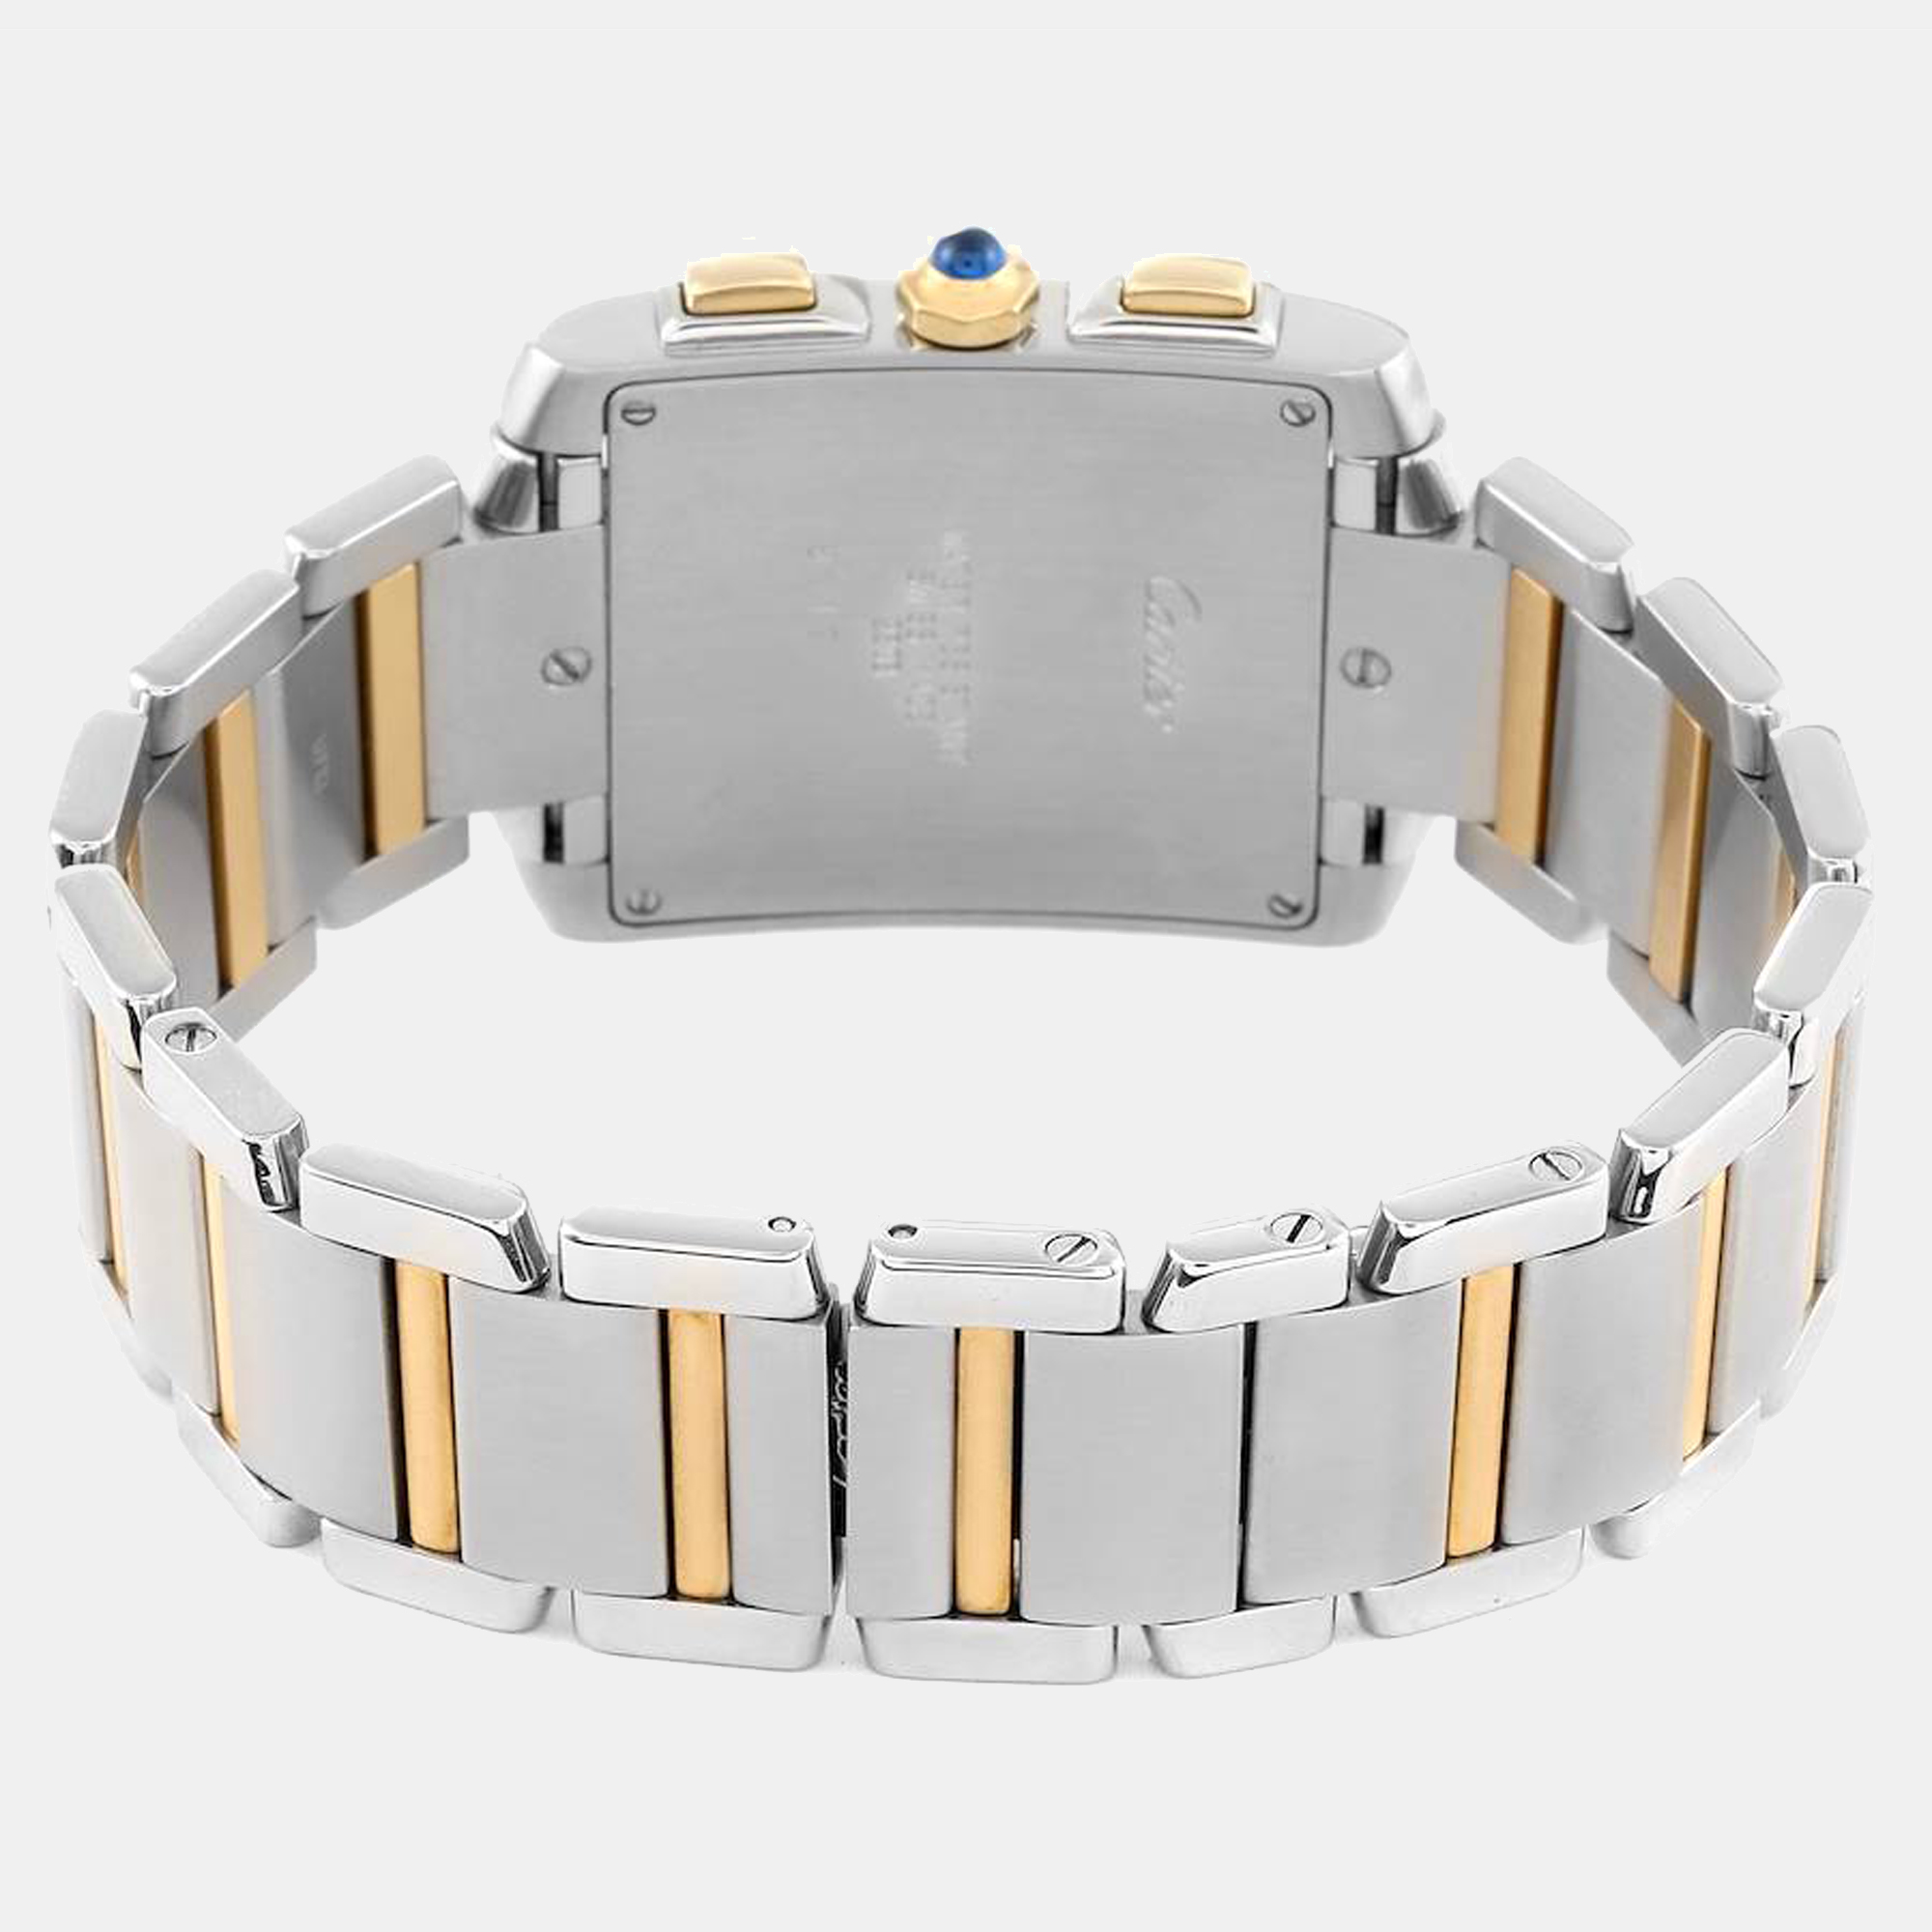 Cartier Silver 18k Yellow Gold And Stainless Steel Tank Francaise W51004Q4 Men's Wristwatch 37 Mm